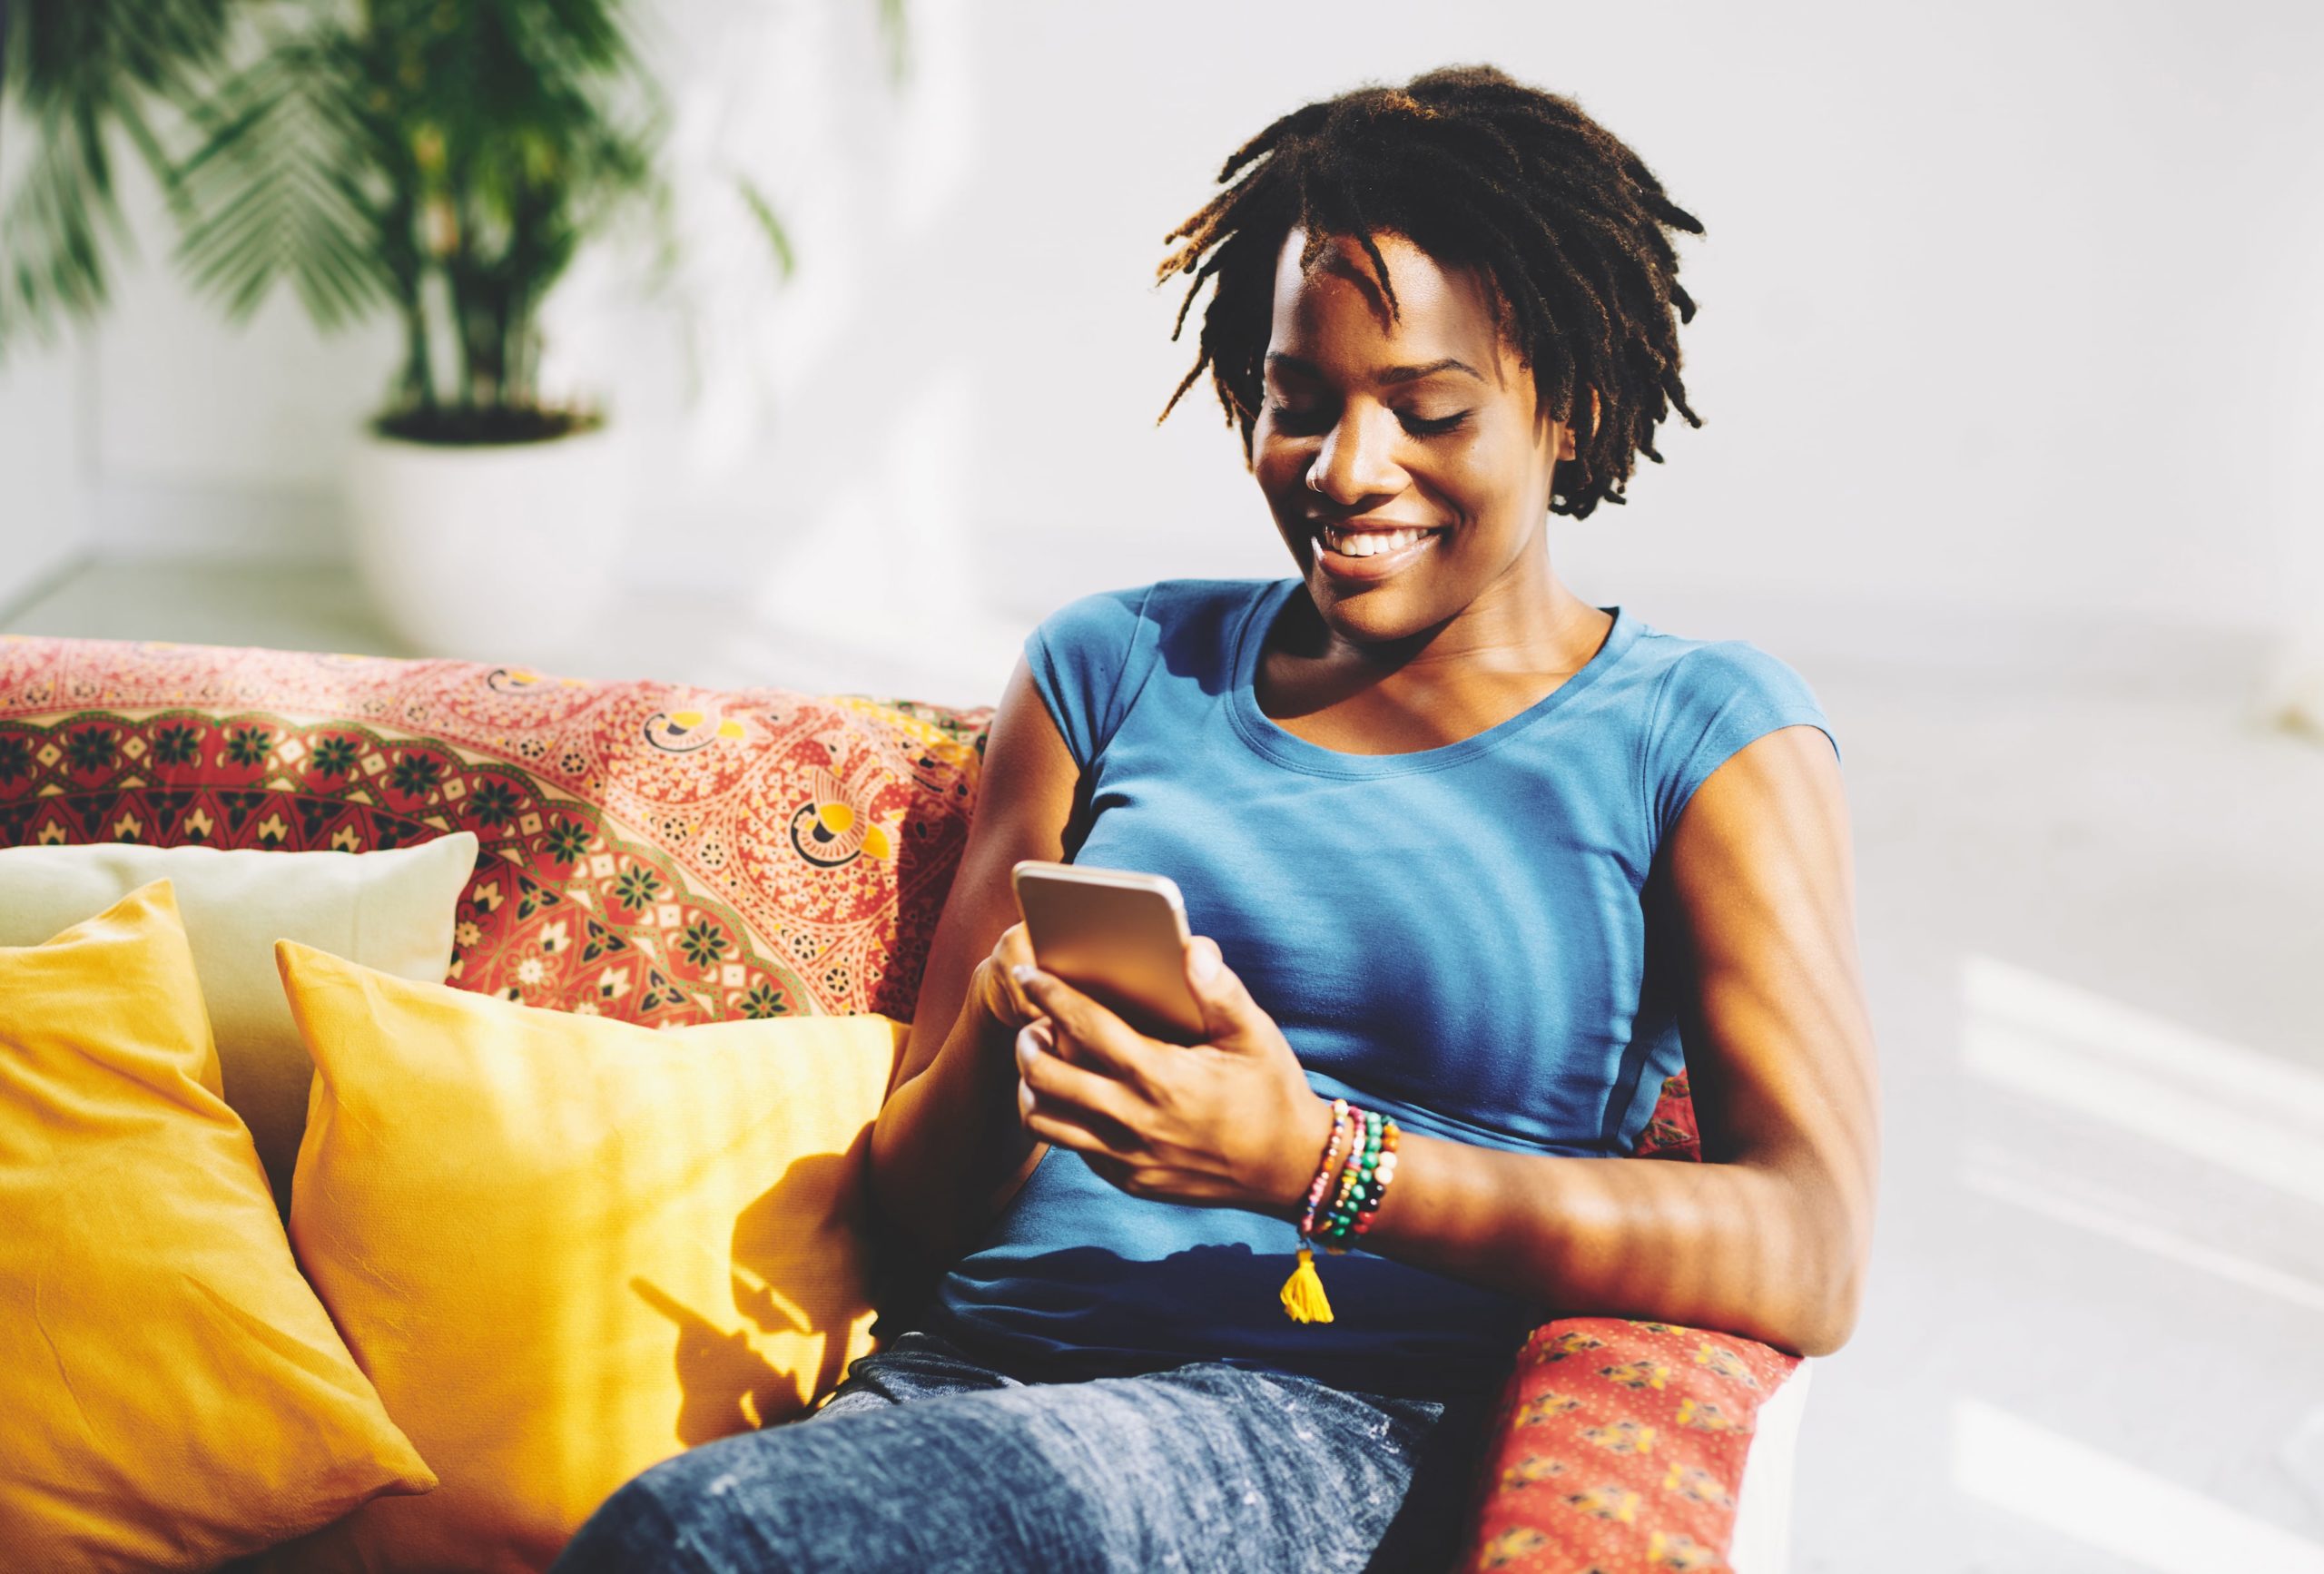 Smiling woman sitting on sofa while texting on her smartphone